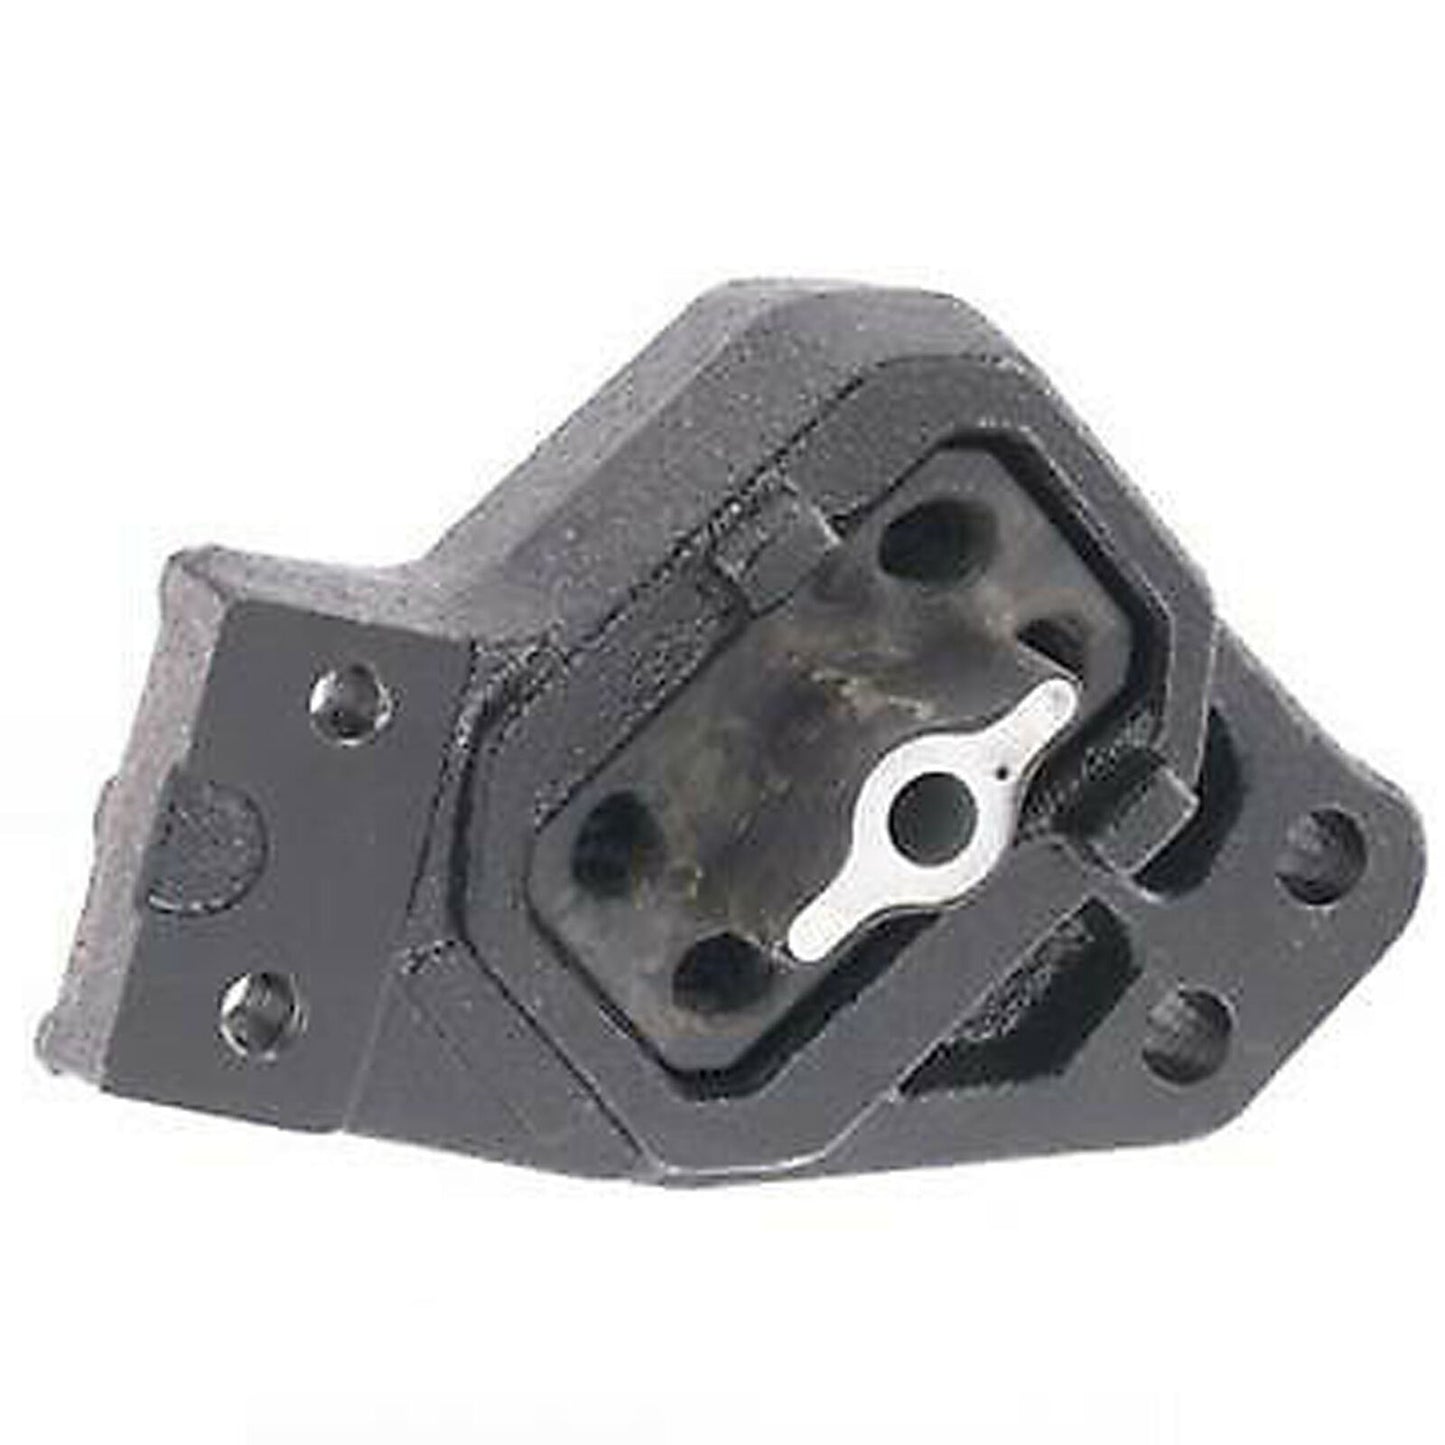 Front Right Motor Mount MotorKing For 2004-2006 Dodge Durango 4.7L 5.7L 4WD.